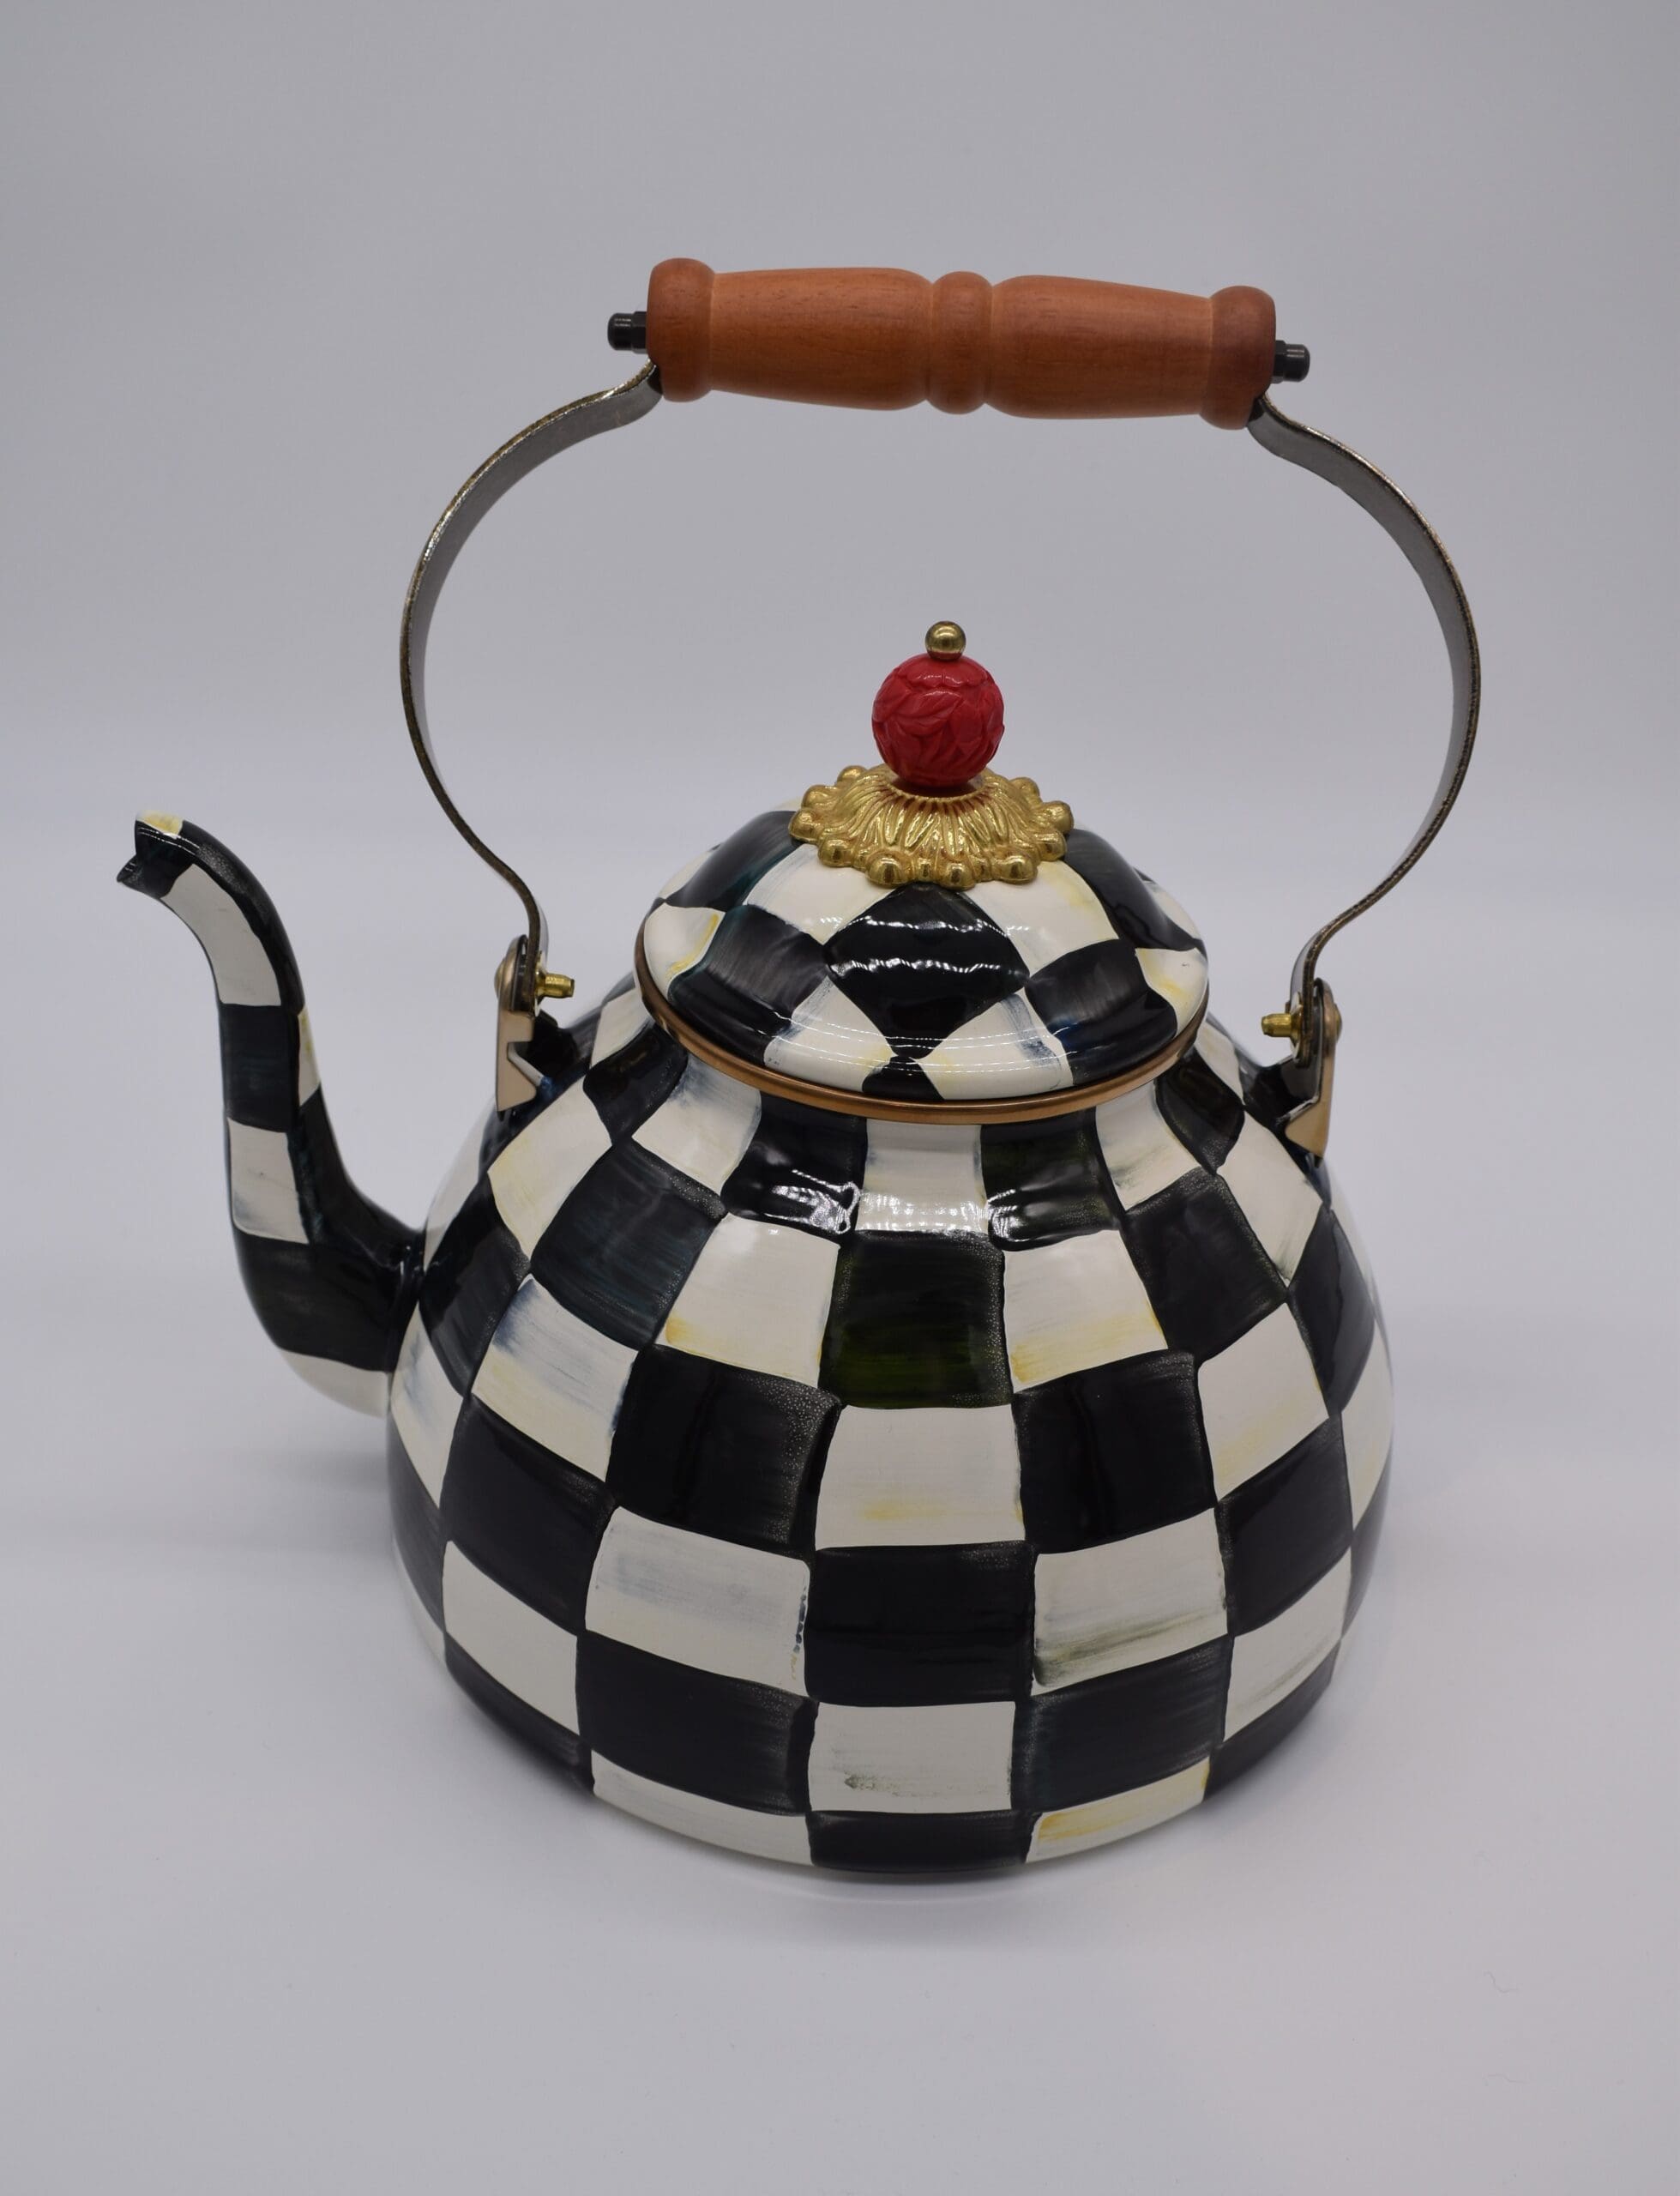 MacKenzie-Childs Courtly Check Teakettle